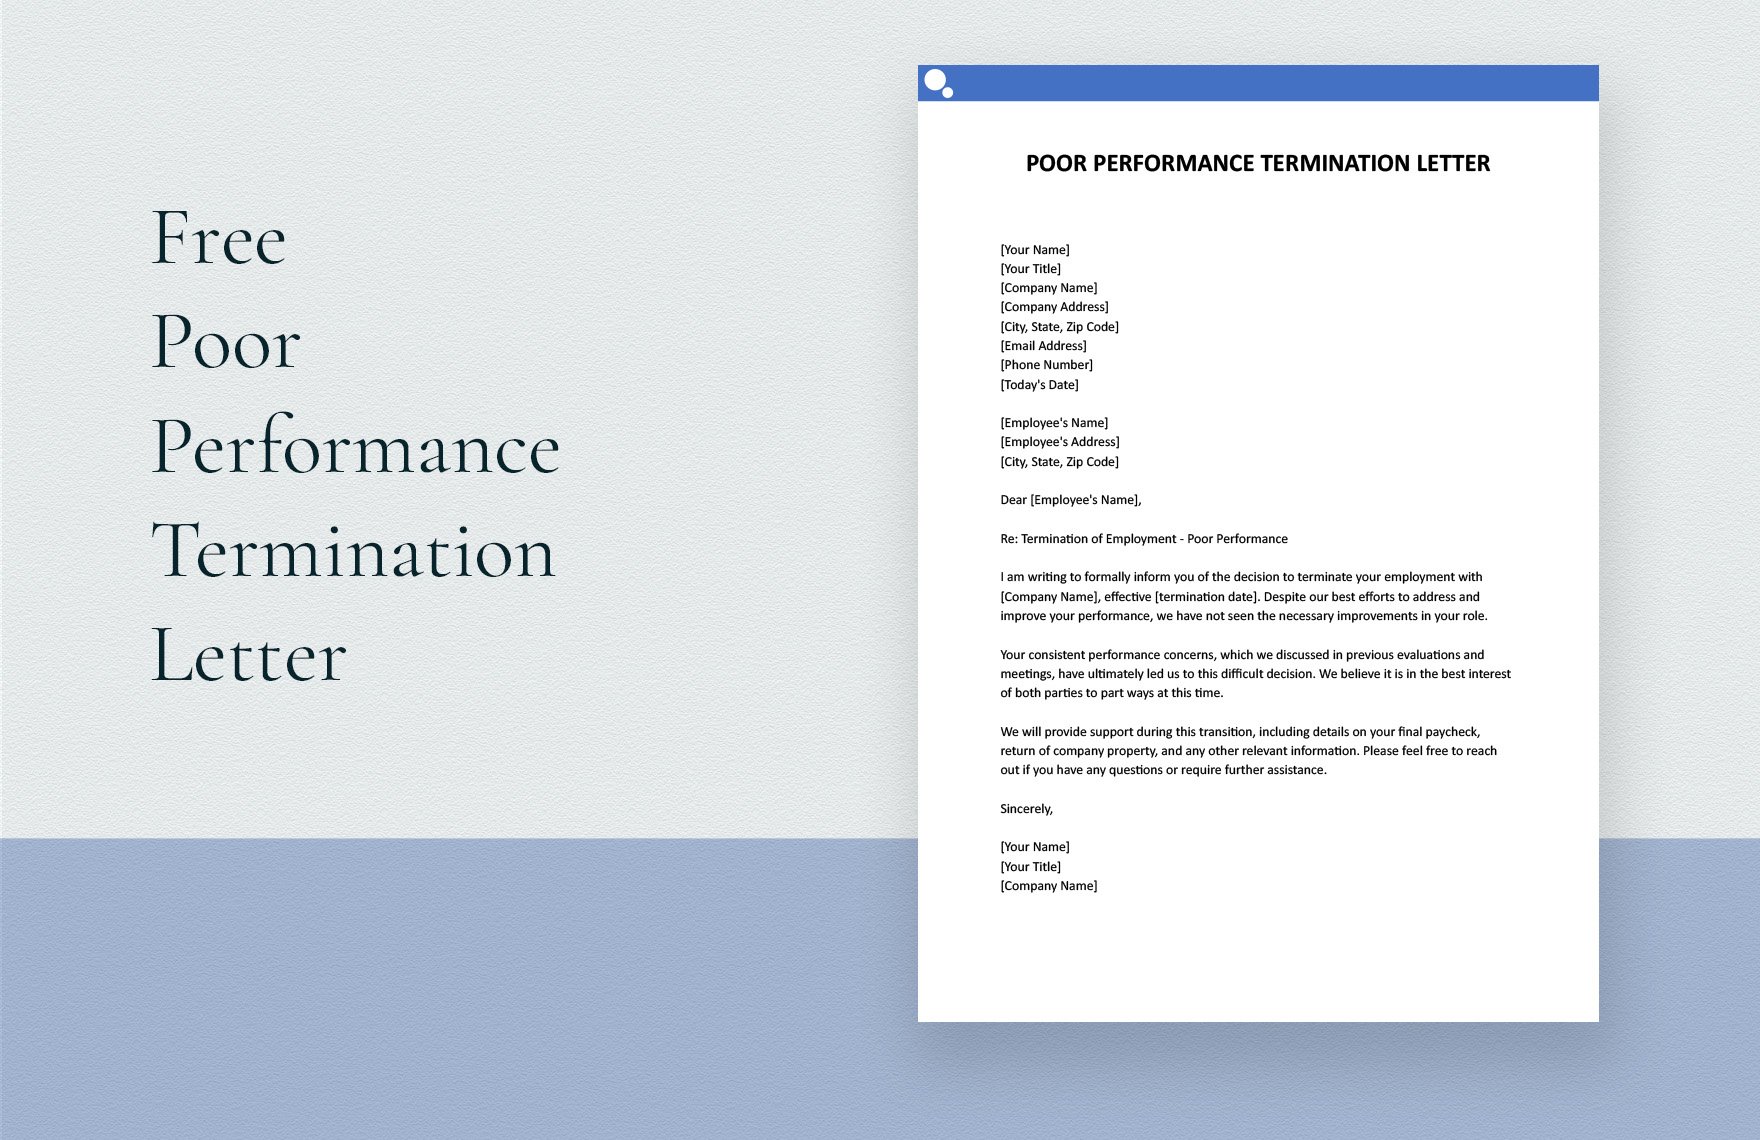 Poor Performance Termination Letter in Word, Google Docs